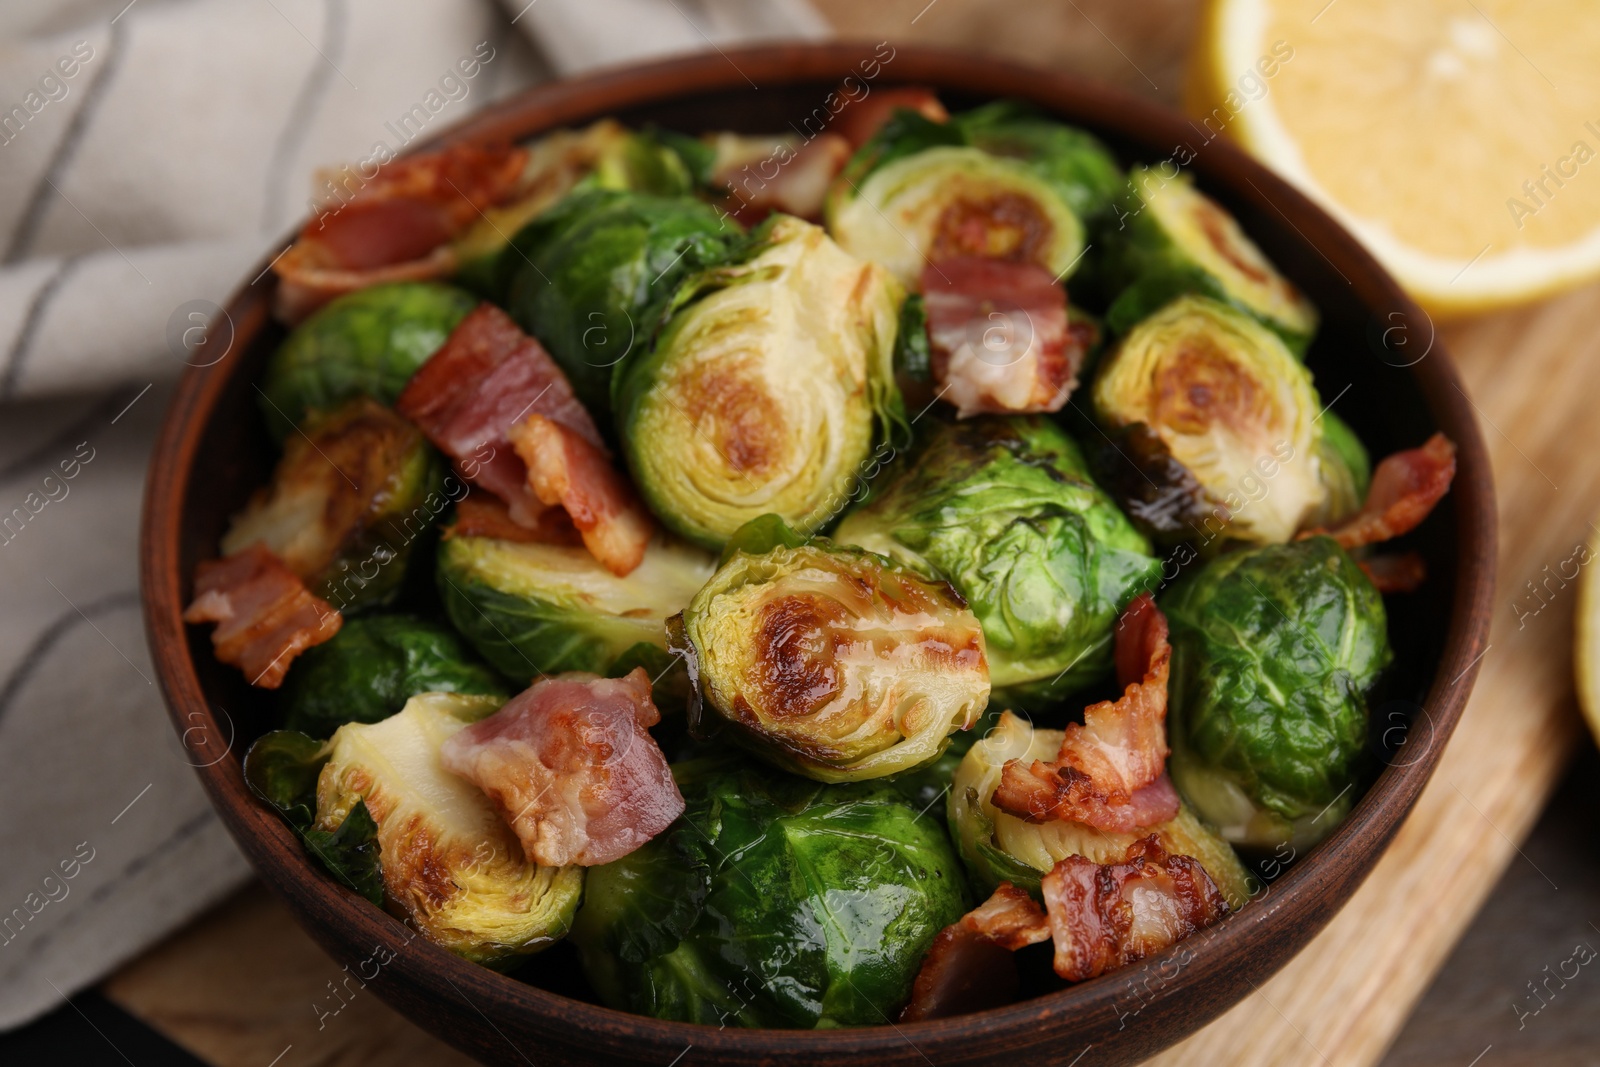 Photo of Delicious roasted Brussels sprouts and bacon in bowl on table, closeup